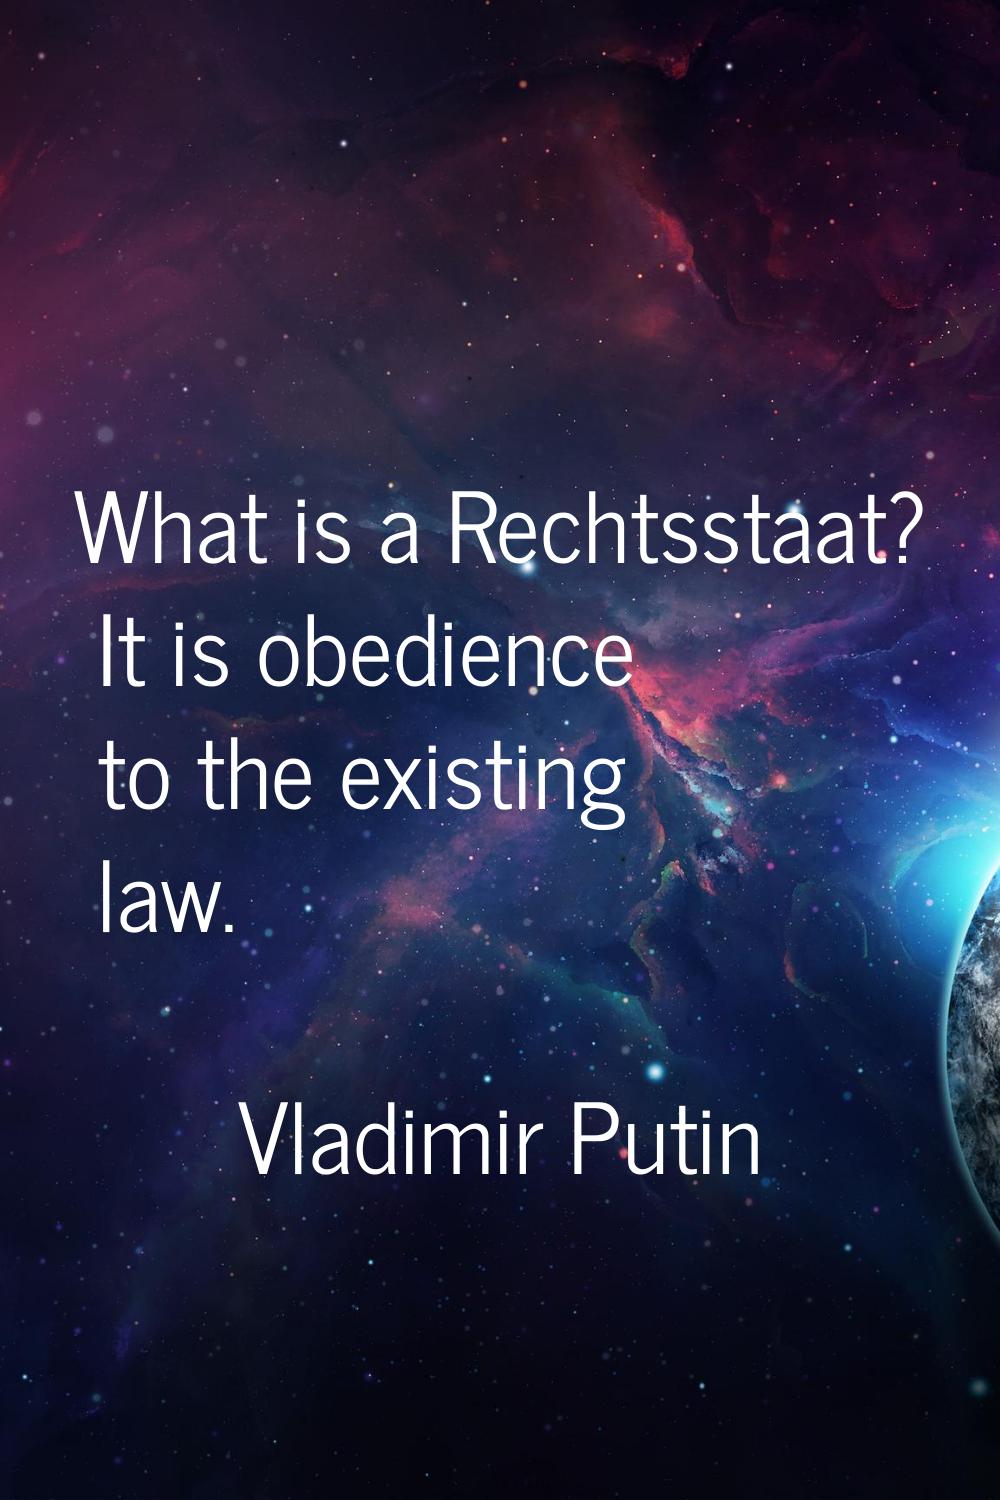 What is a Rechtsstaat? It is obedience to the existing law.